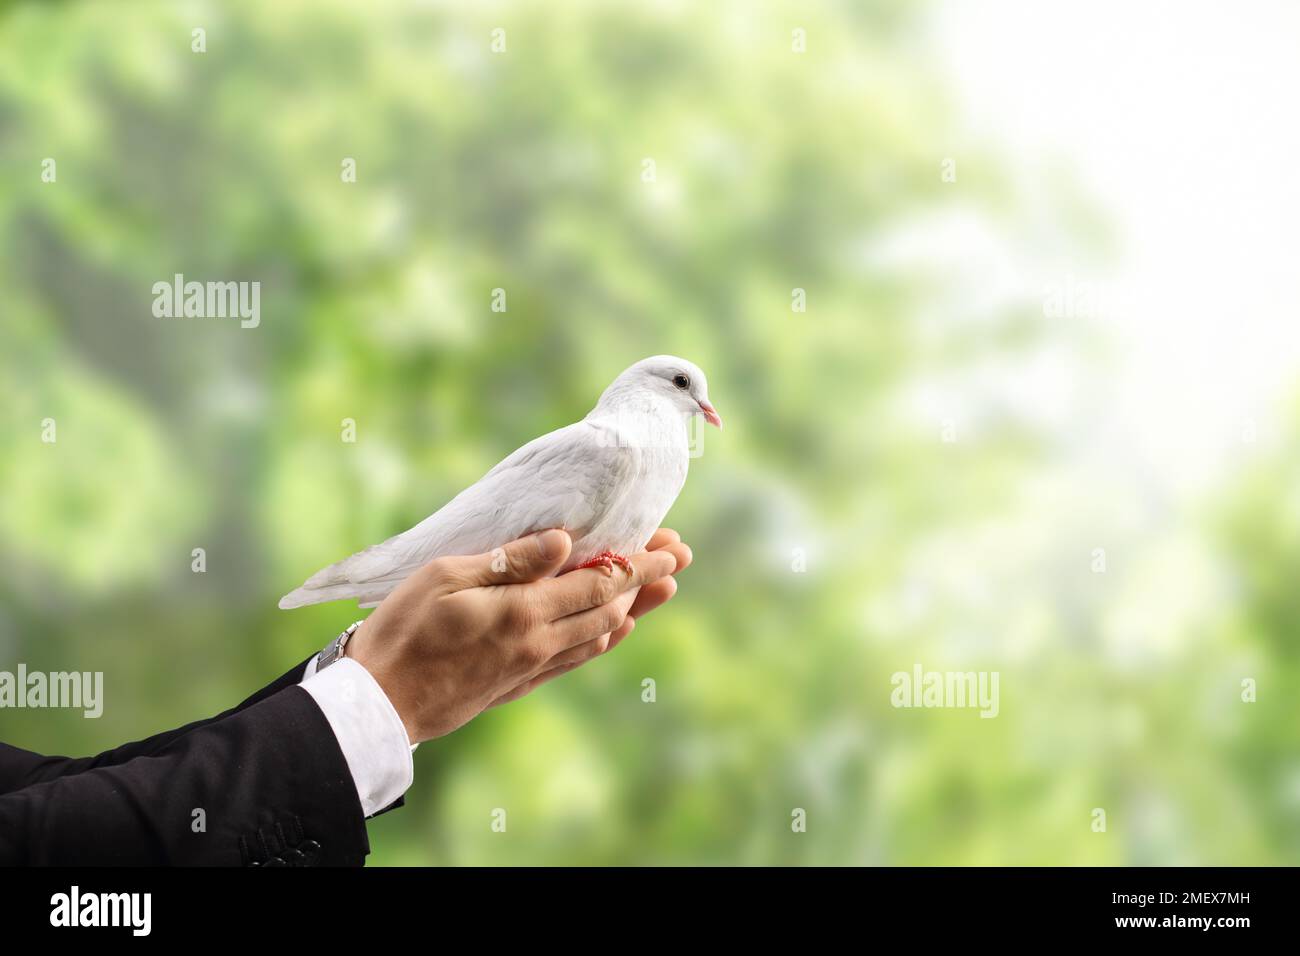 Male hand holding a white dove in a park with trees in the background Stock Photo